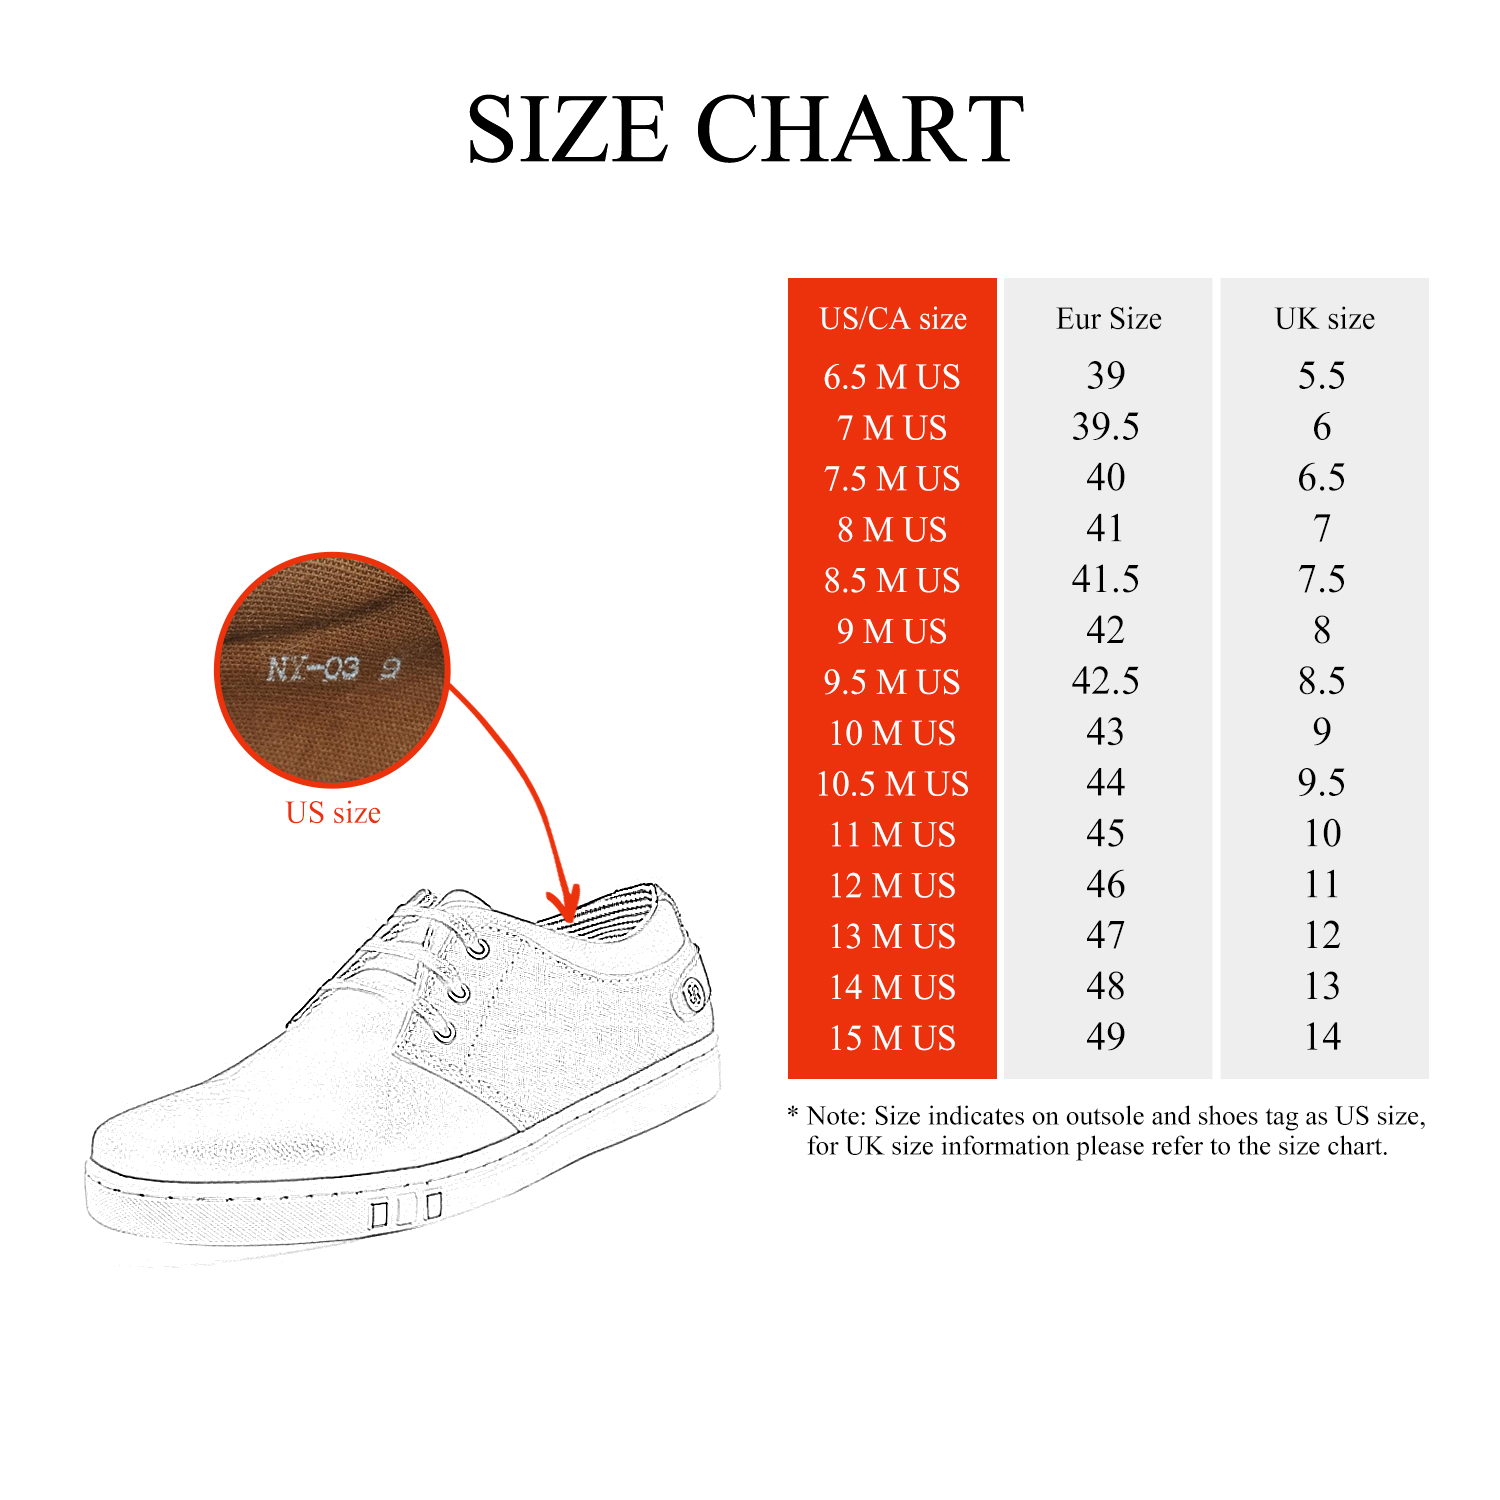 BRUNO MARC Mens Mesh Leather Sneakers Casual Shoes Slip On Lace Up Waking Shoes NY-03 BROWN 9 - image 4 of 4